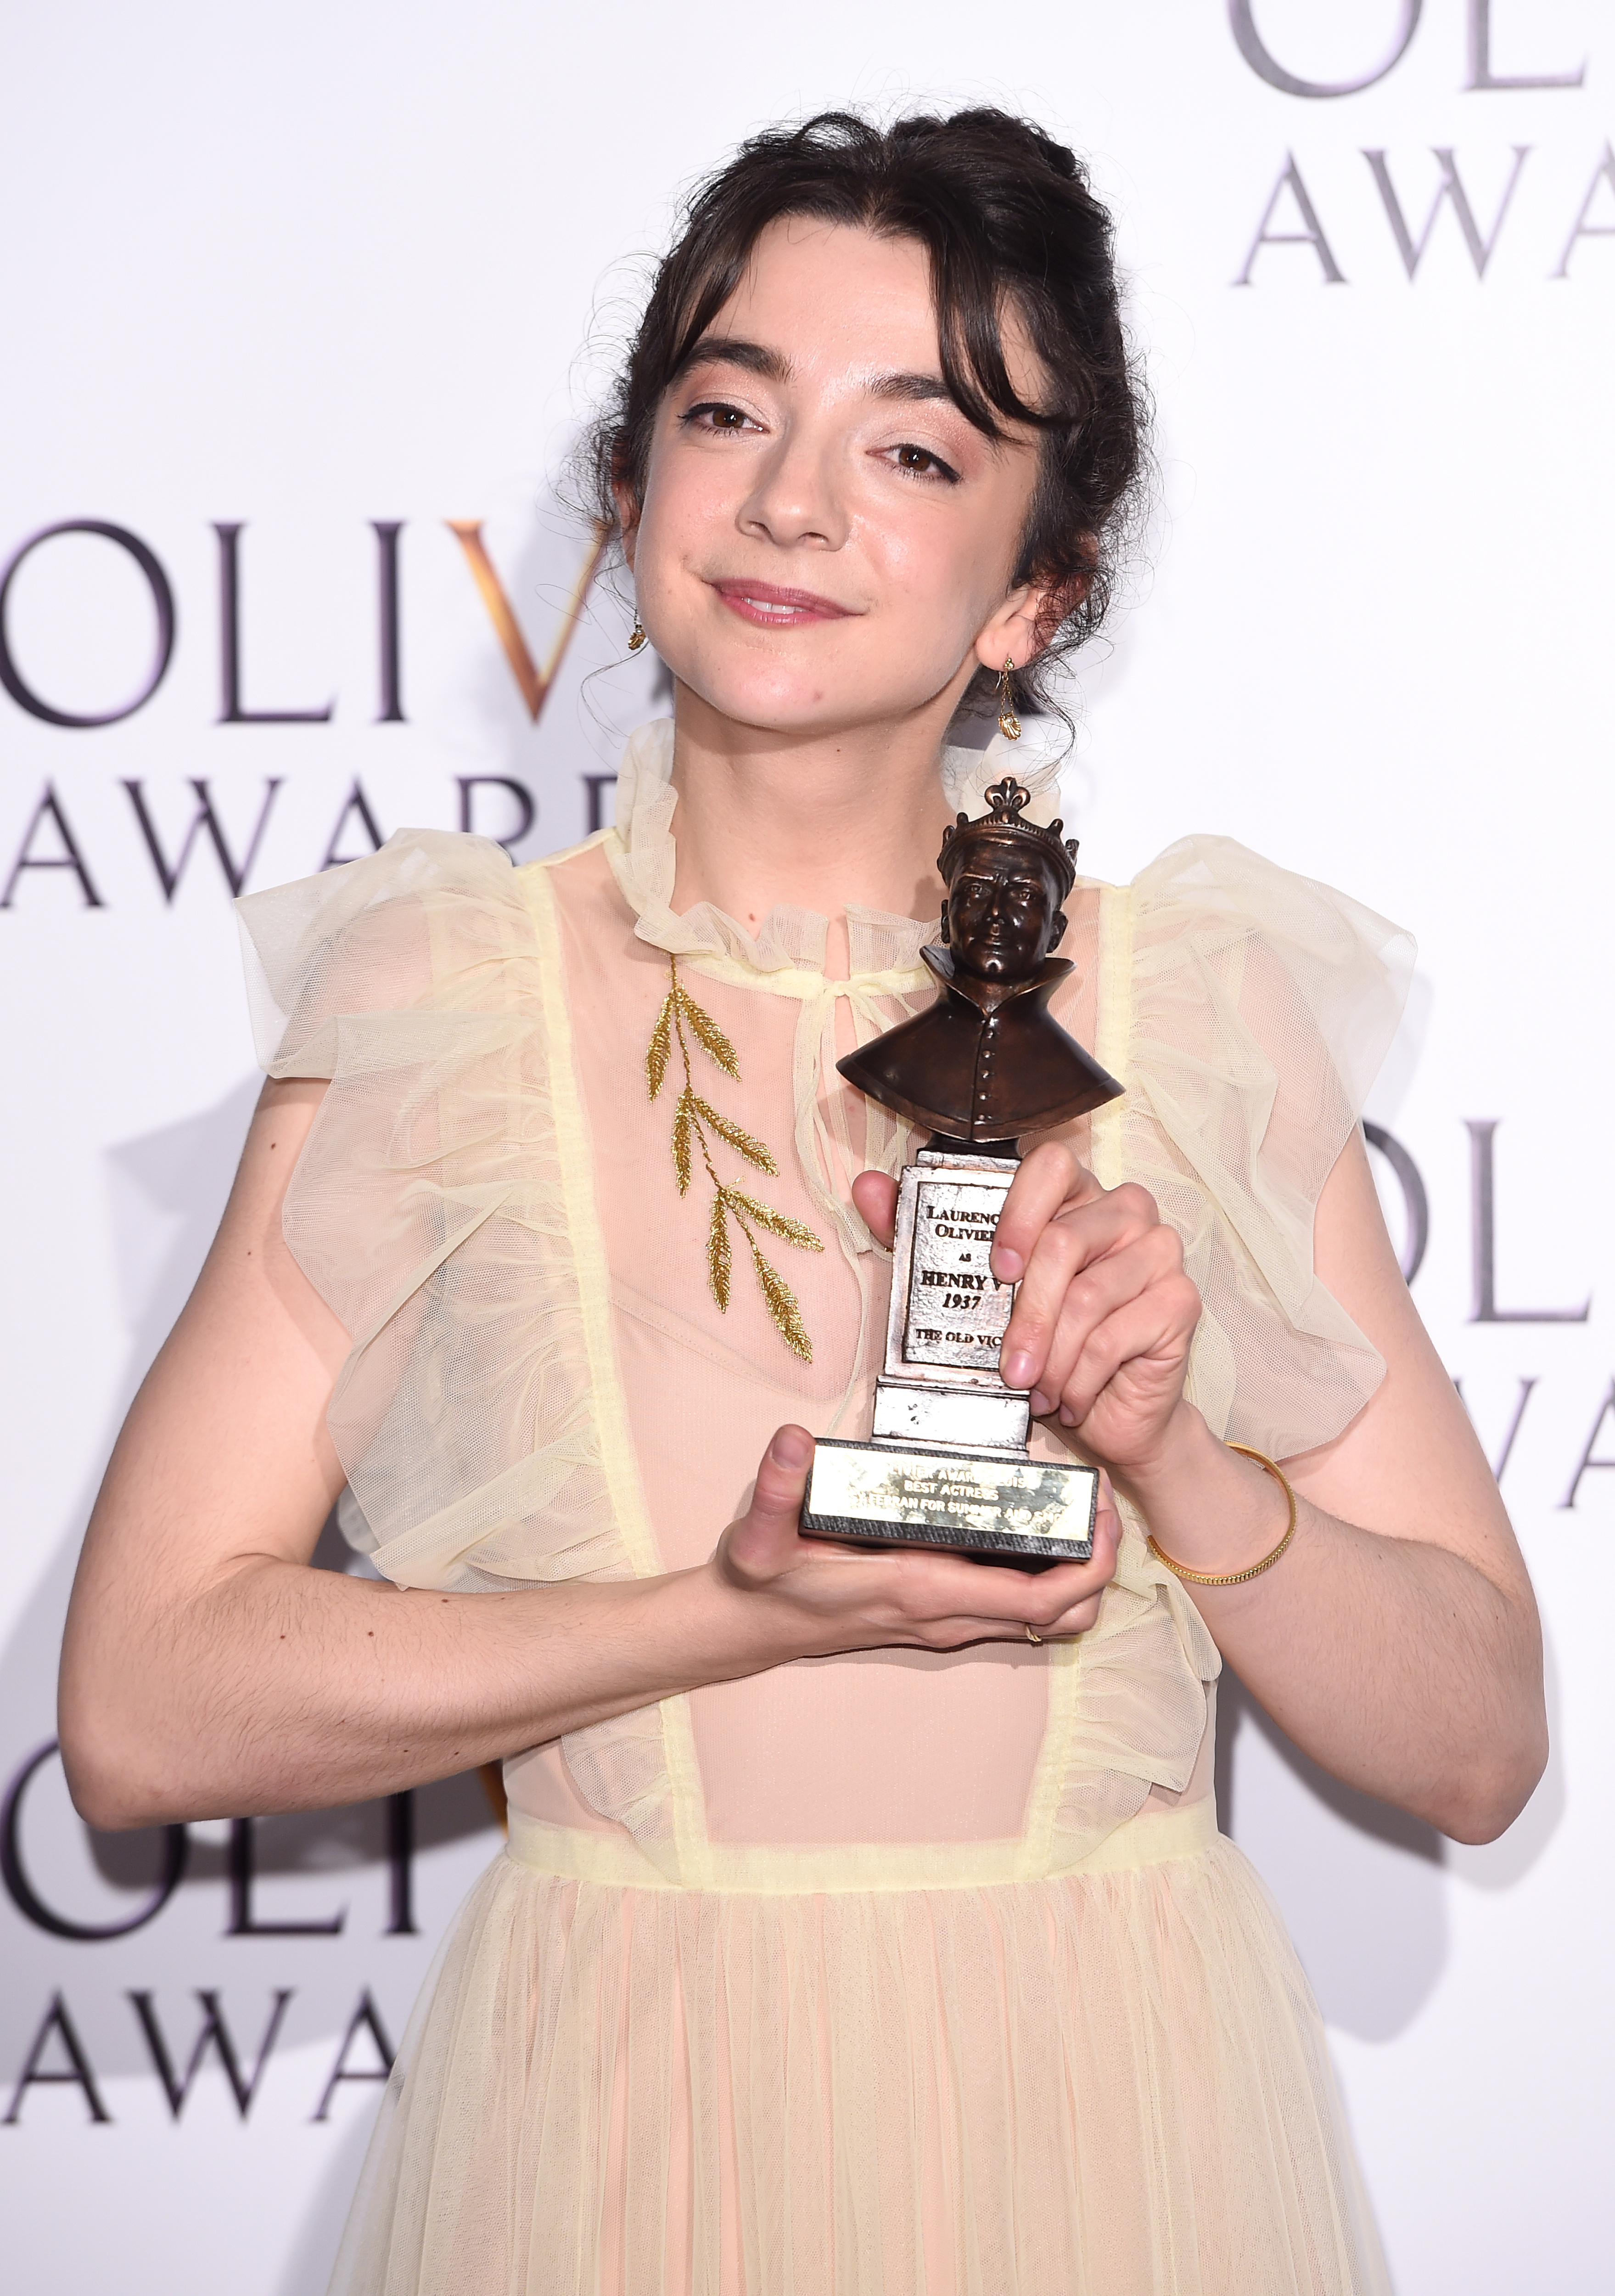 Patsy Ferran poses with her award for Best Actress award for "Summer And Smoke" during The Olivier Awards with Mastercard at the Royal Albert Hall on April 7, 2019 in London, England | Source: Getty Images